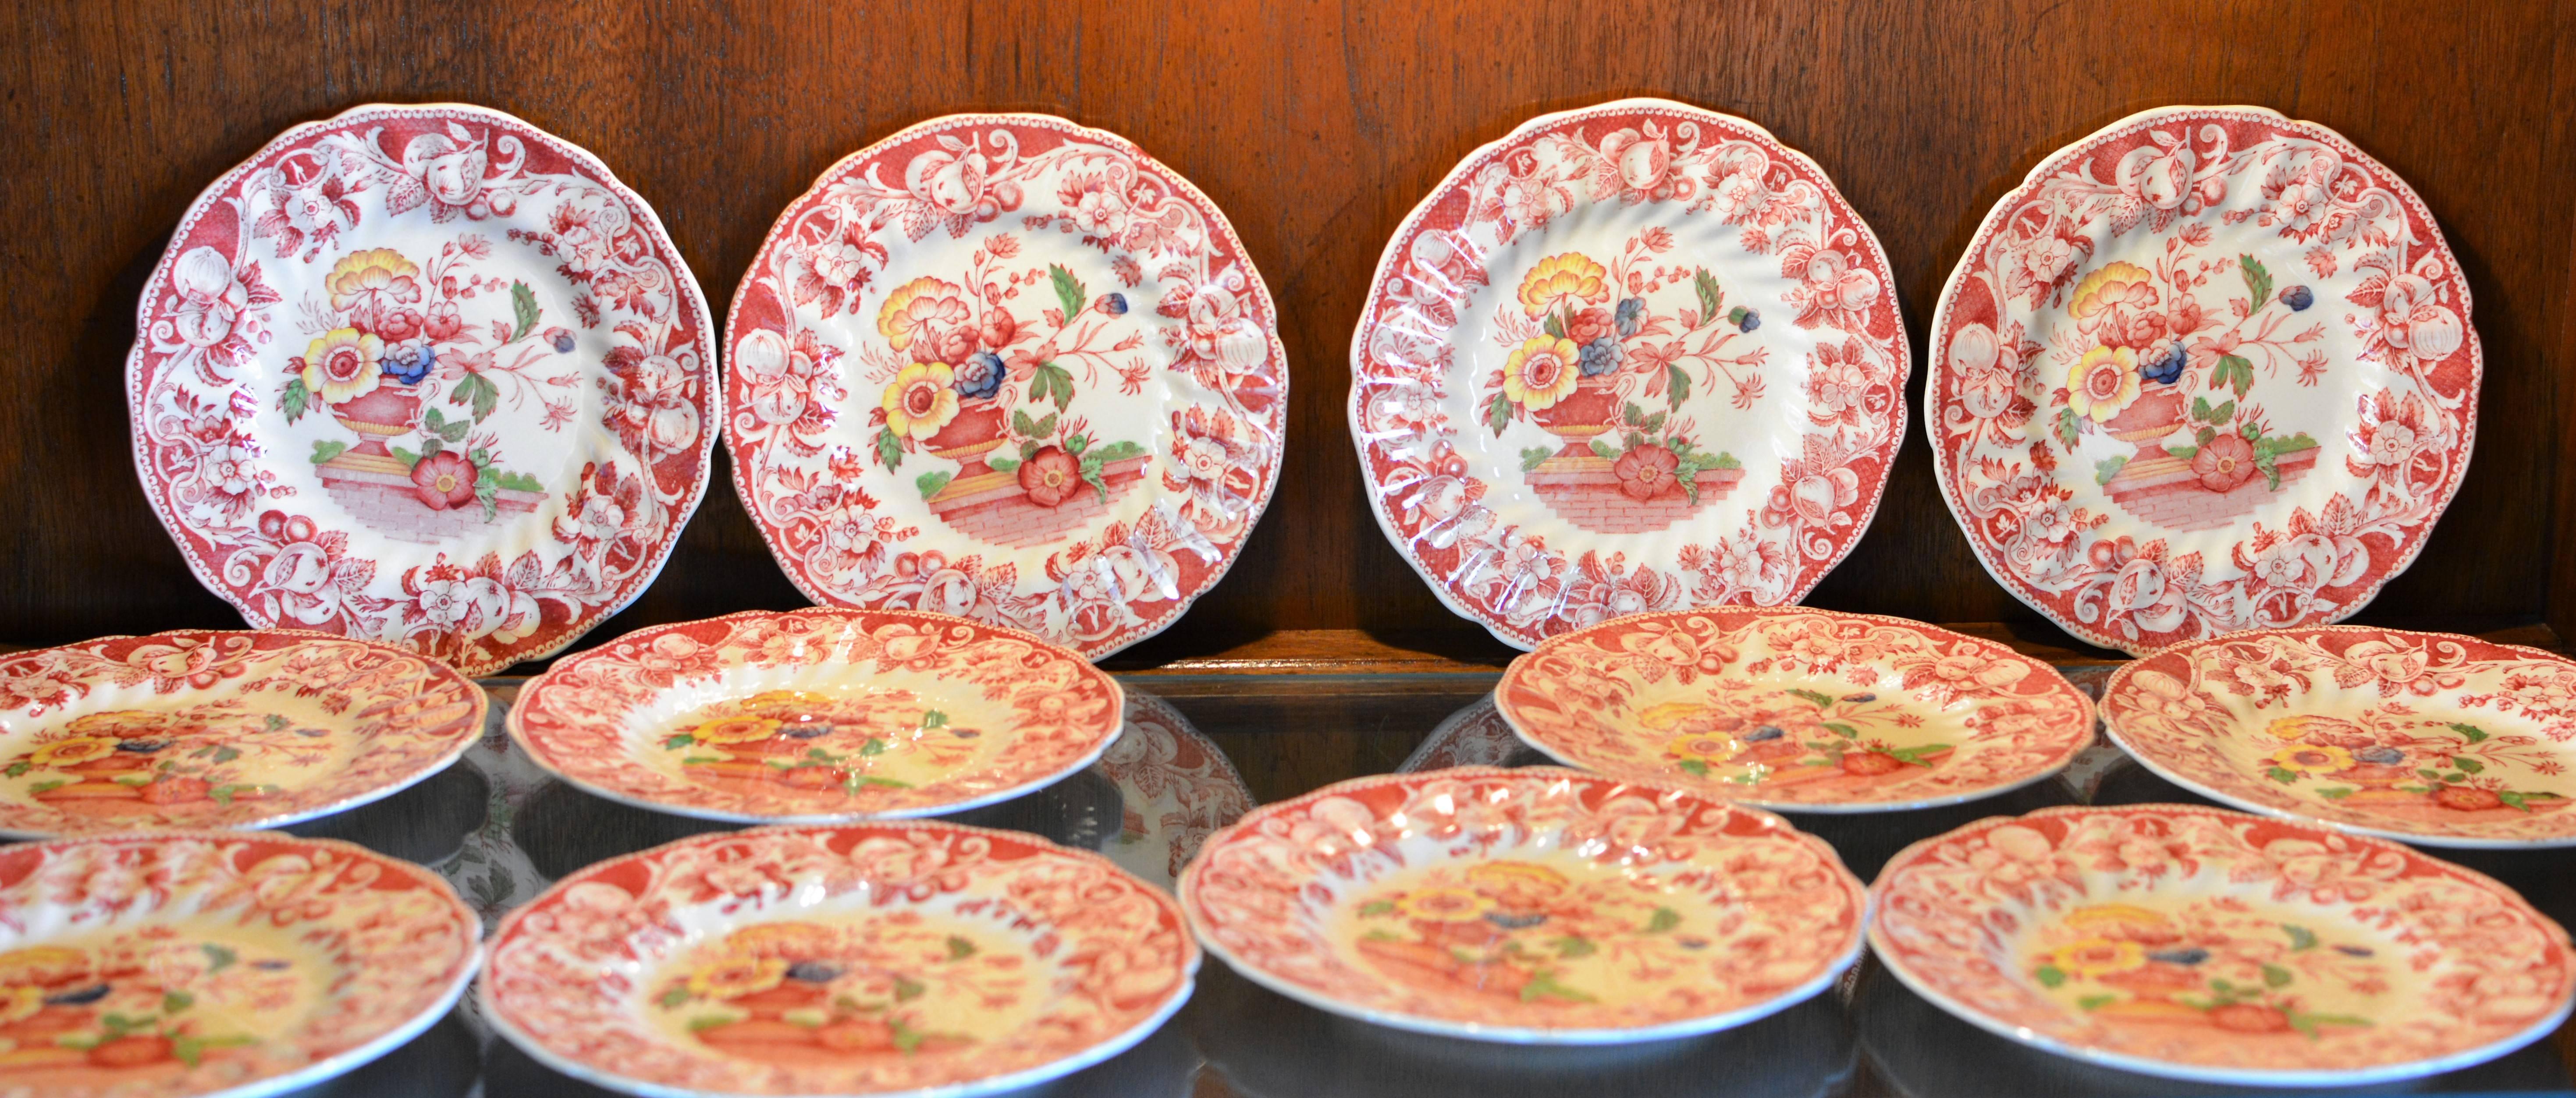 Royal Doulton Pomeroy Red Multi-Color Center Design China In Excellent Condition For Sale In Pataskala, OH